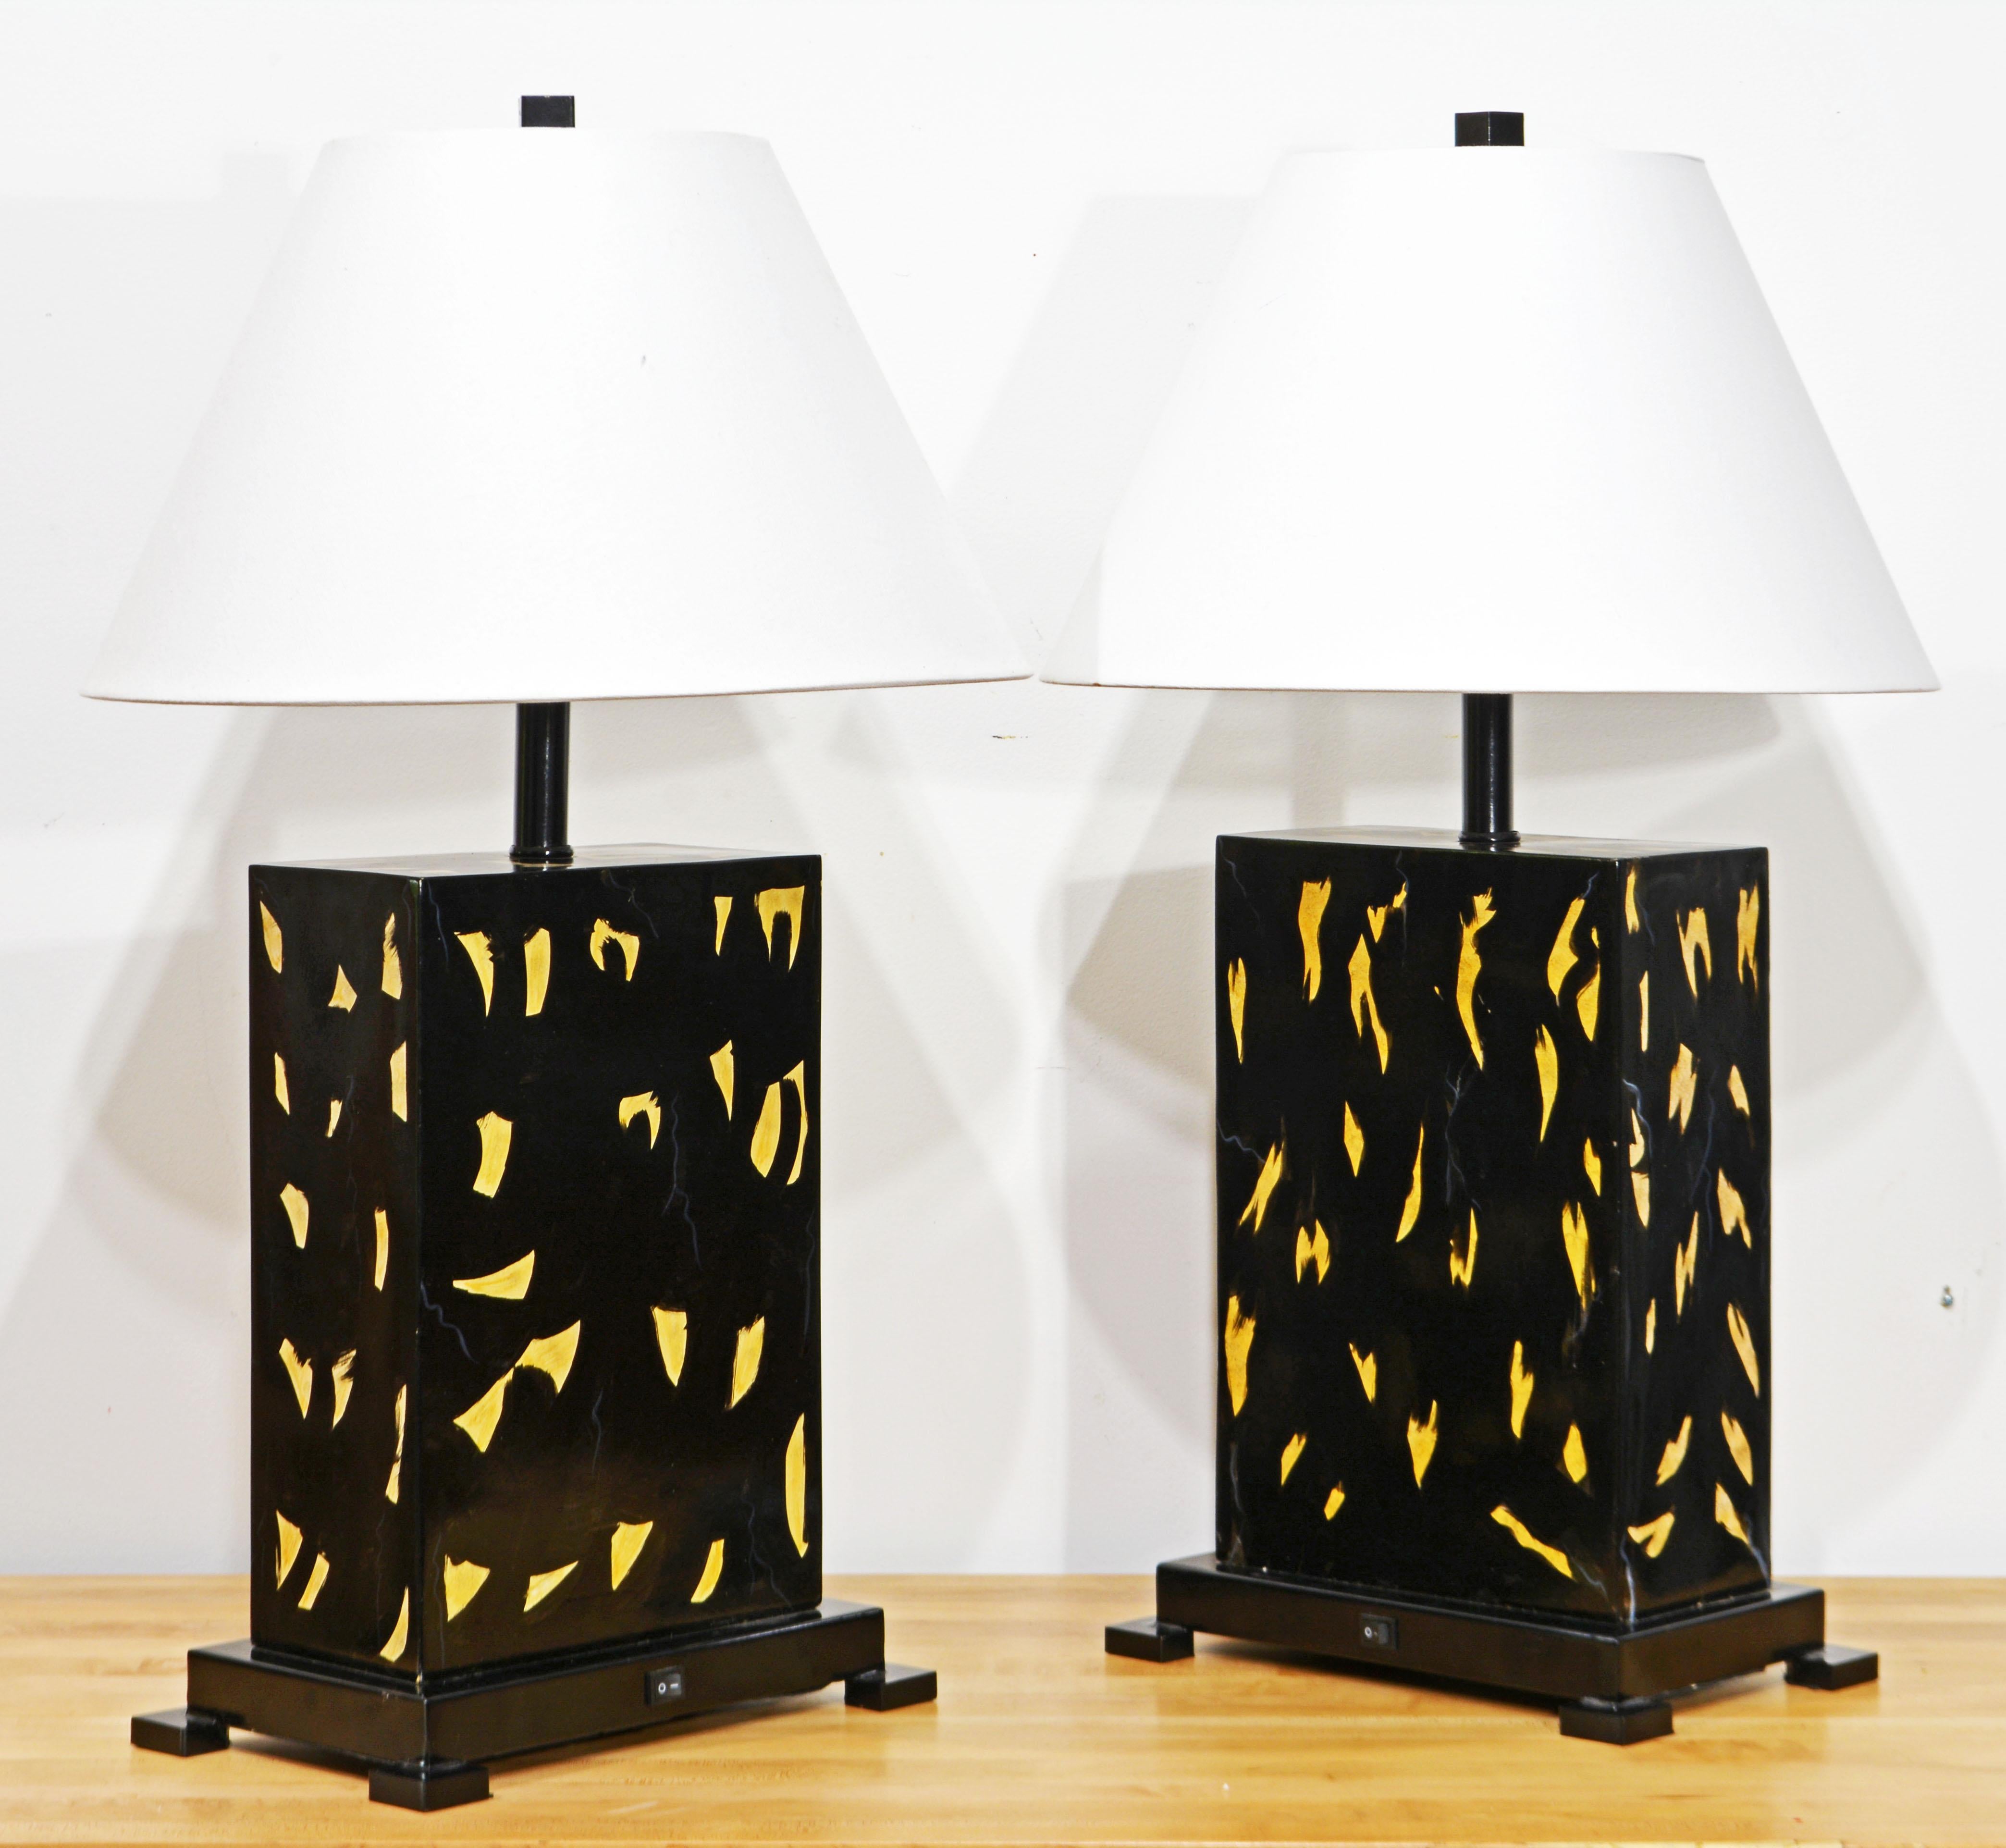 These artistically accomplished table lamps feature a main rectangular body of heavy wood with blackered lacquered background and a expressive ivory colored fragments and subtle veins. Each lamp is slightly different reflecting the artist behind the